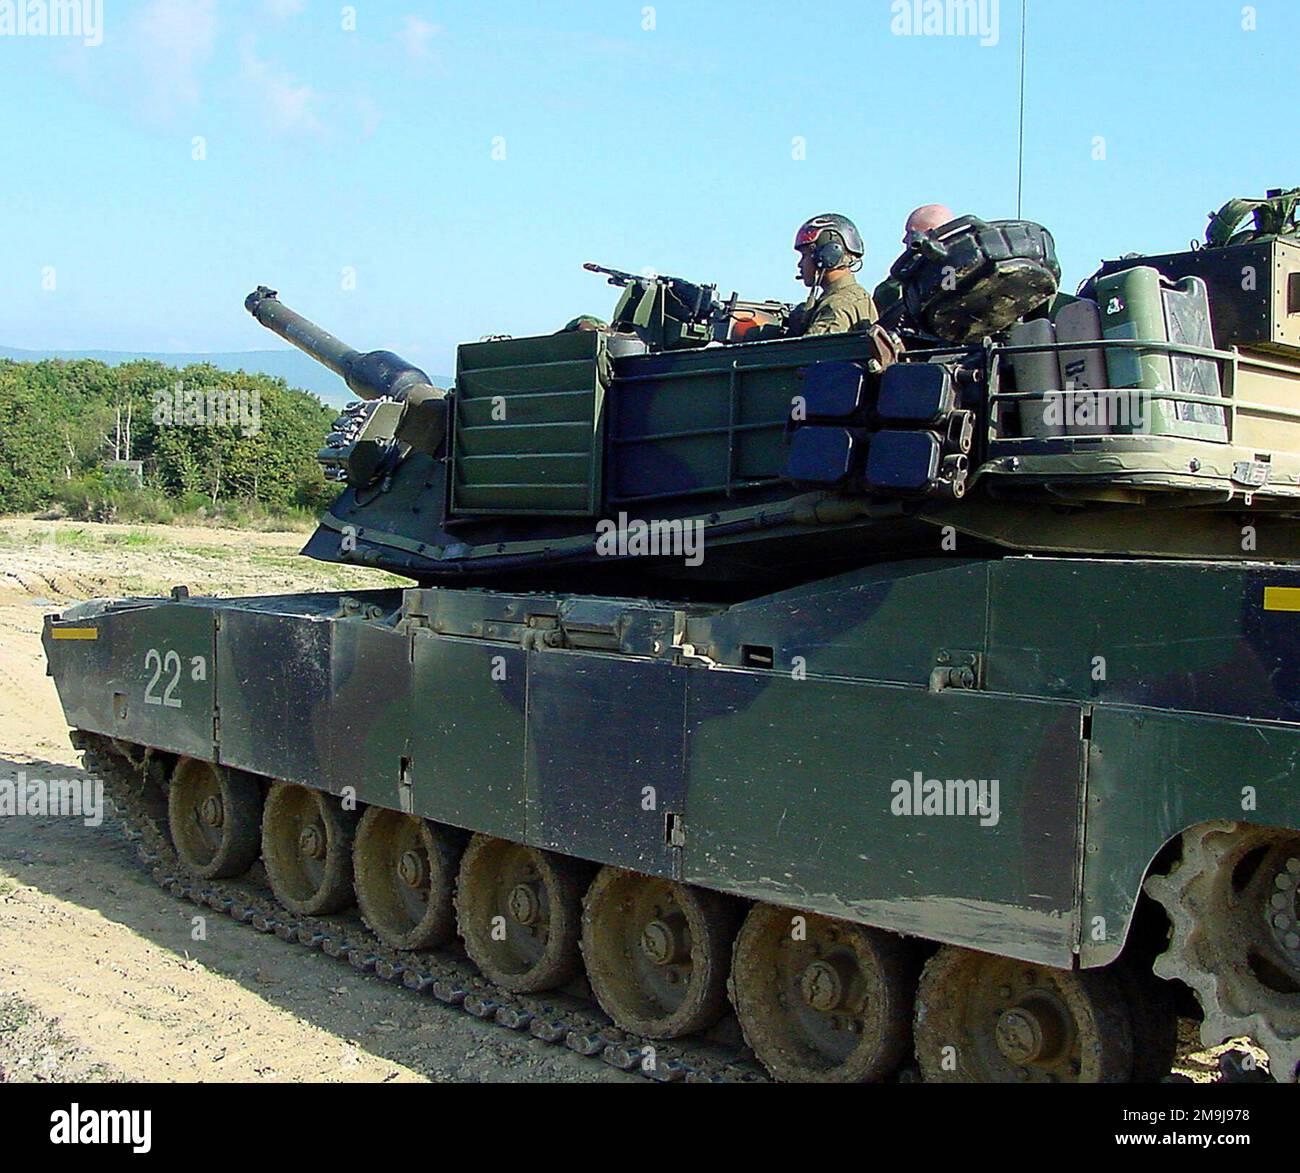 020919-A-9112S-008. Base: Friedberg Local Training Area State: Hessen Country: Deutschland / Germany (DEU) Scene Major Command Shown: USAREUR Stock Photo